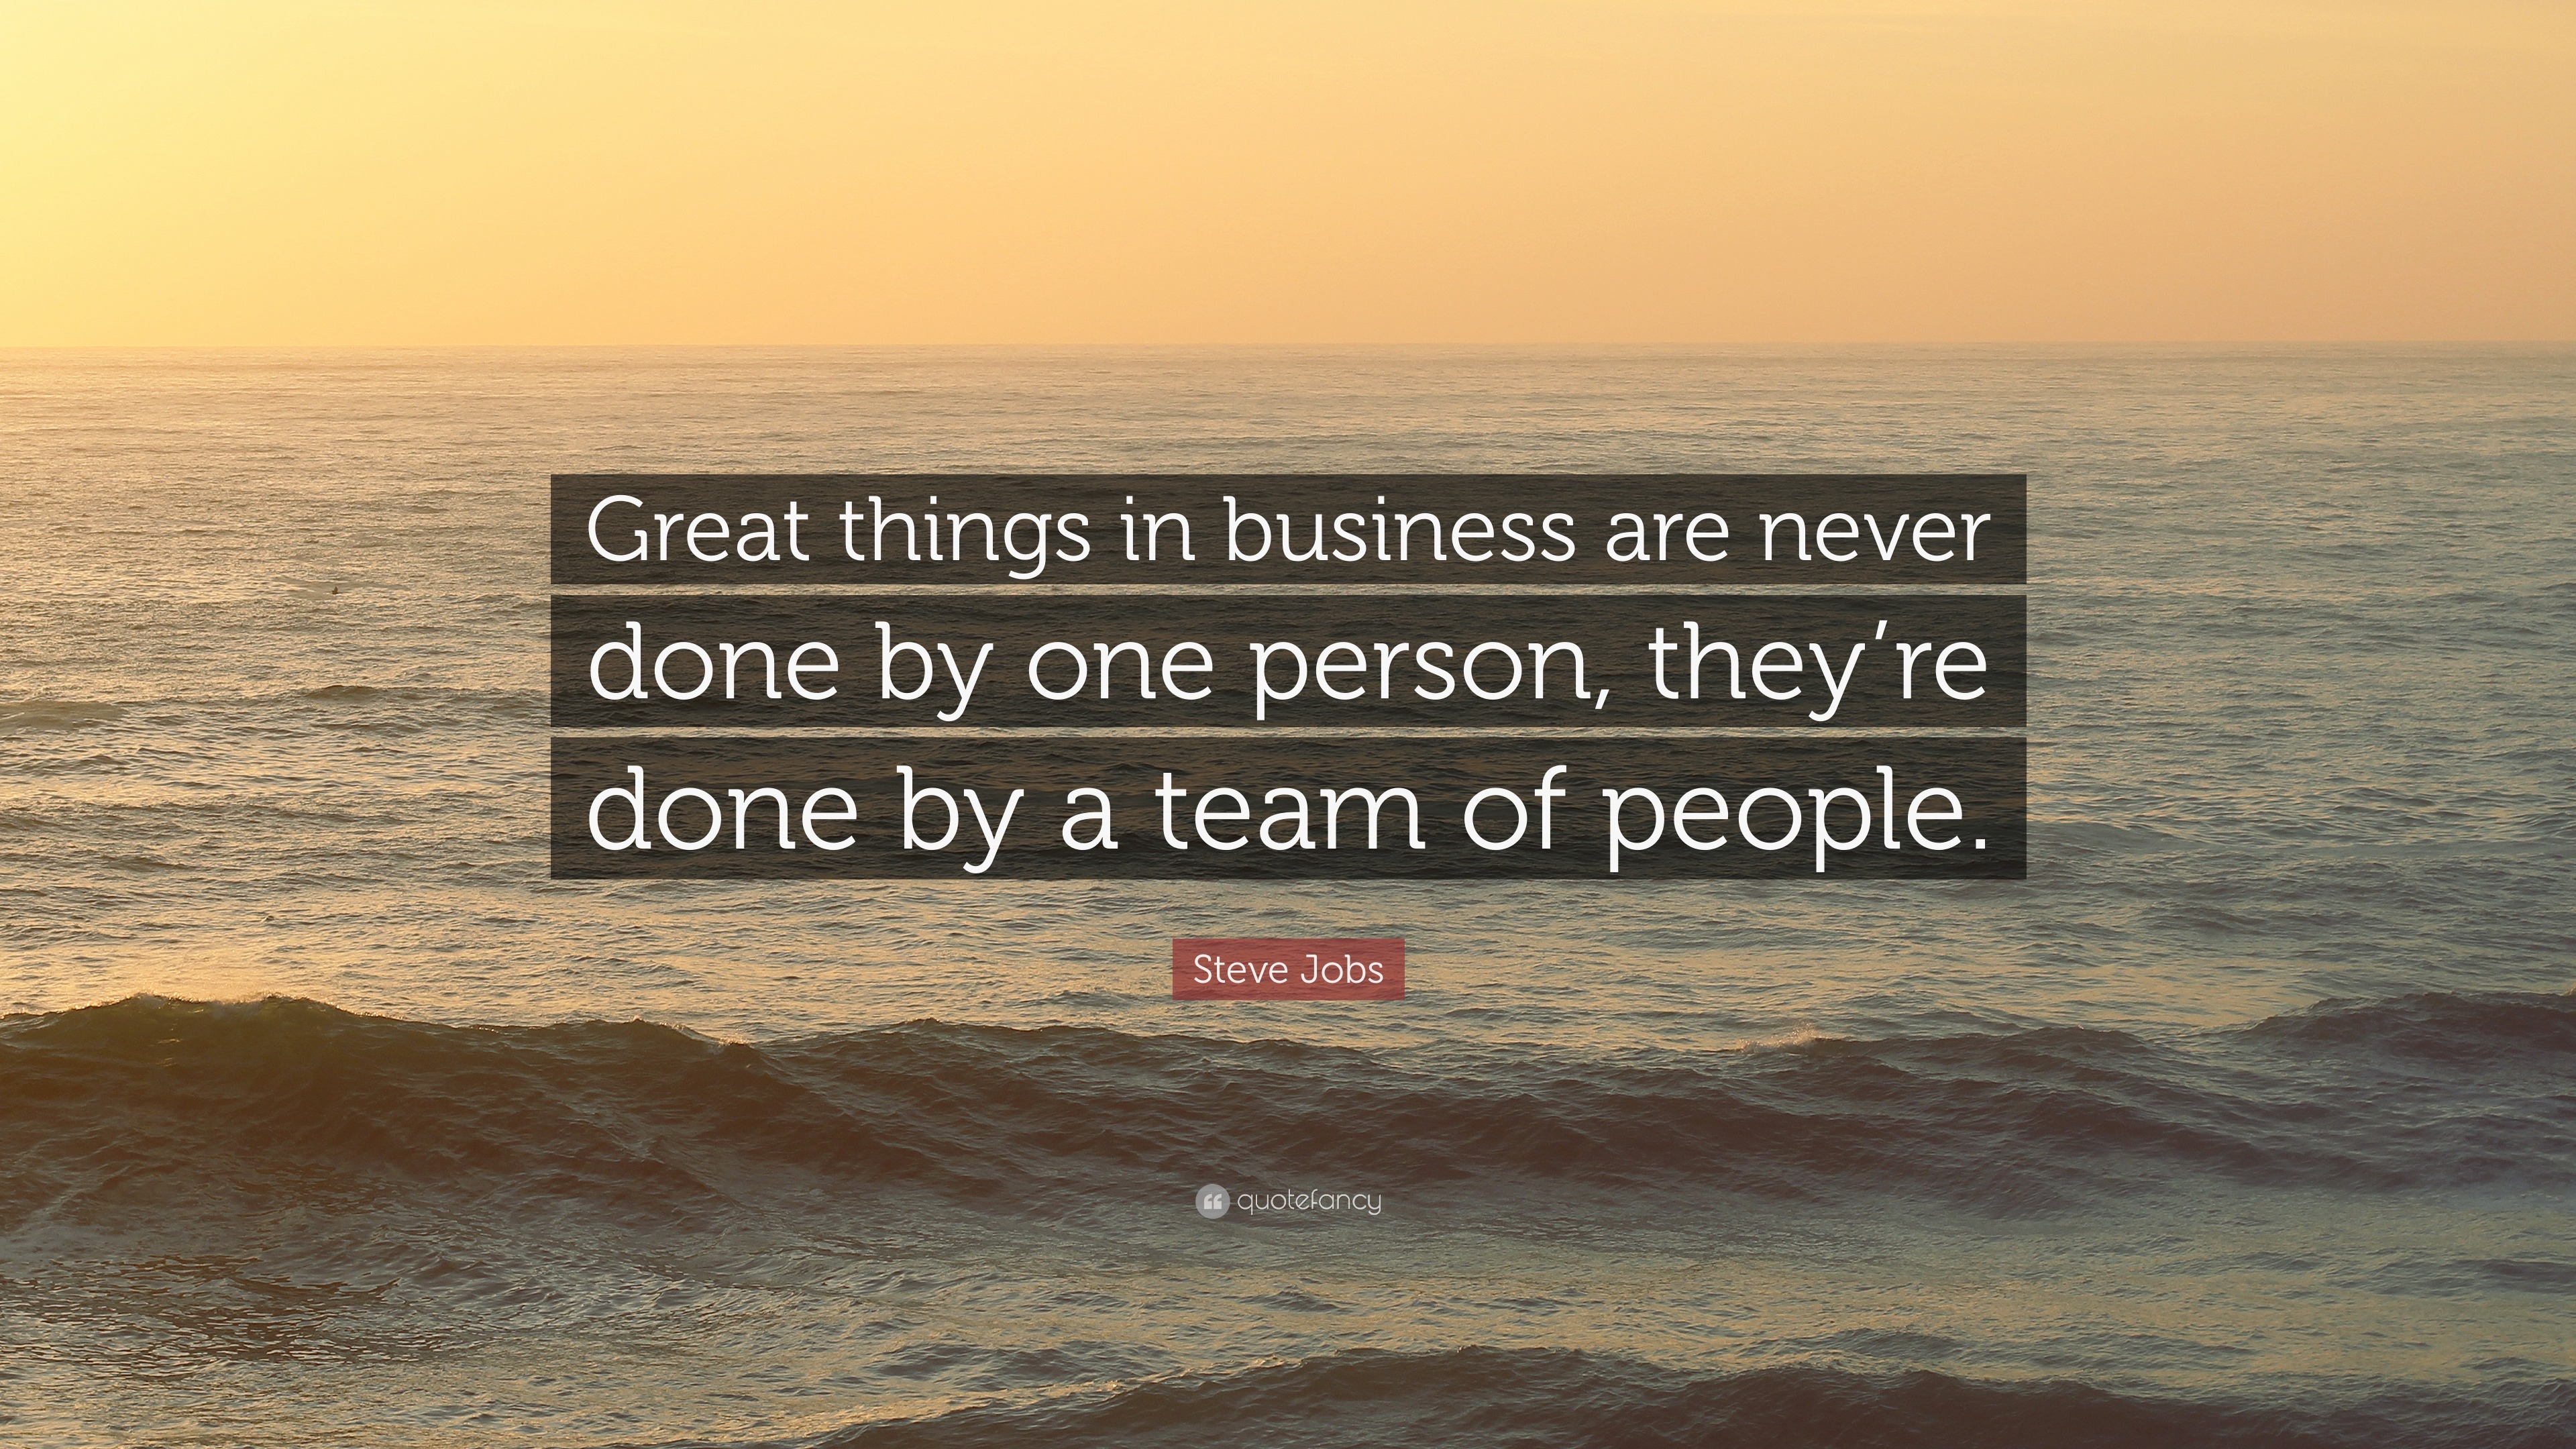 4245341 Steve Jobs Quote Great things in business are never done by one